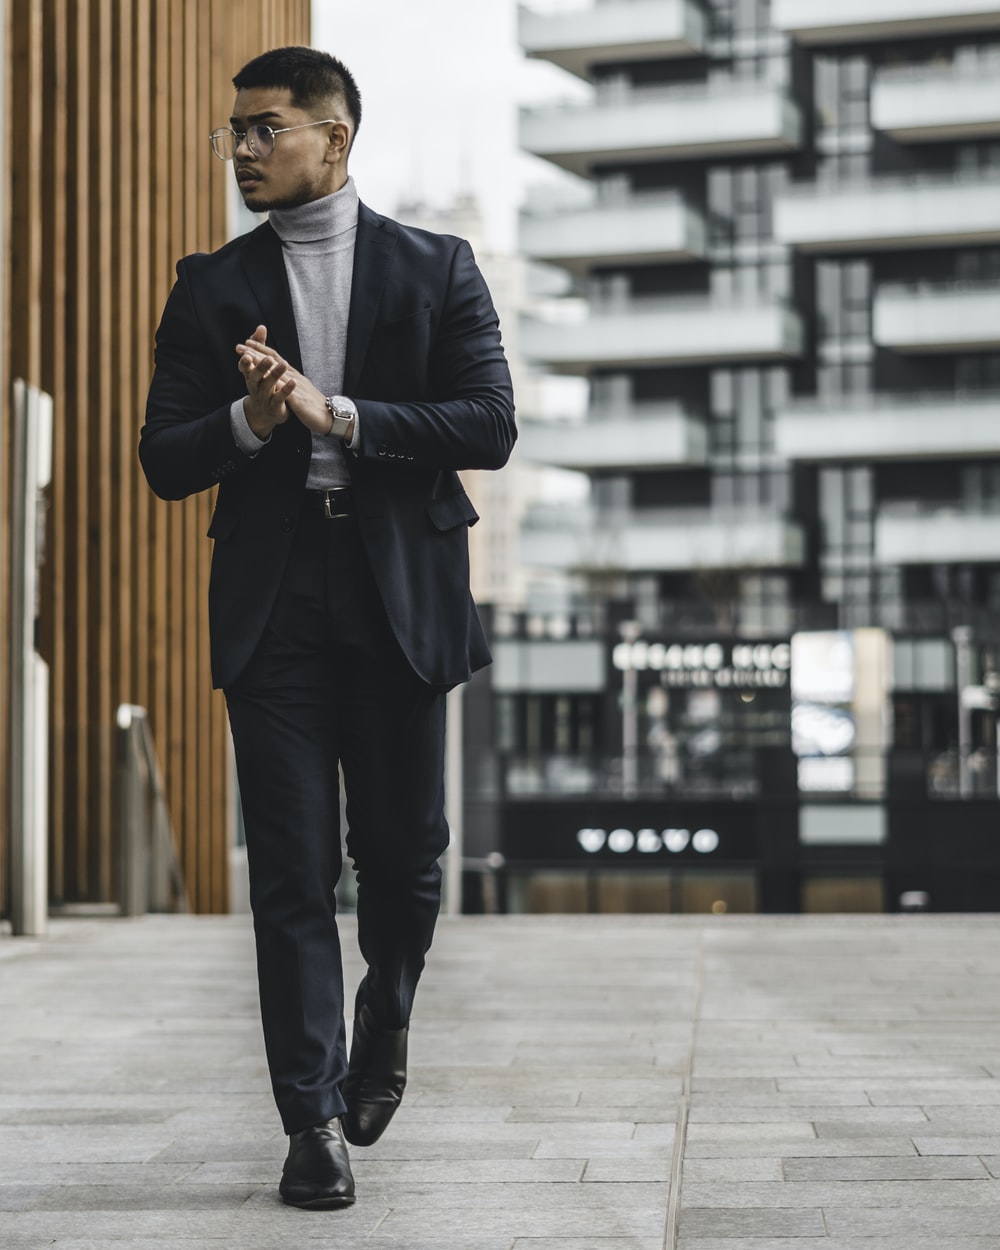 Business Casual Attire For Men 70 Relaxed Office Style Ideas | vlr.eng.br